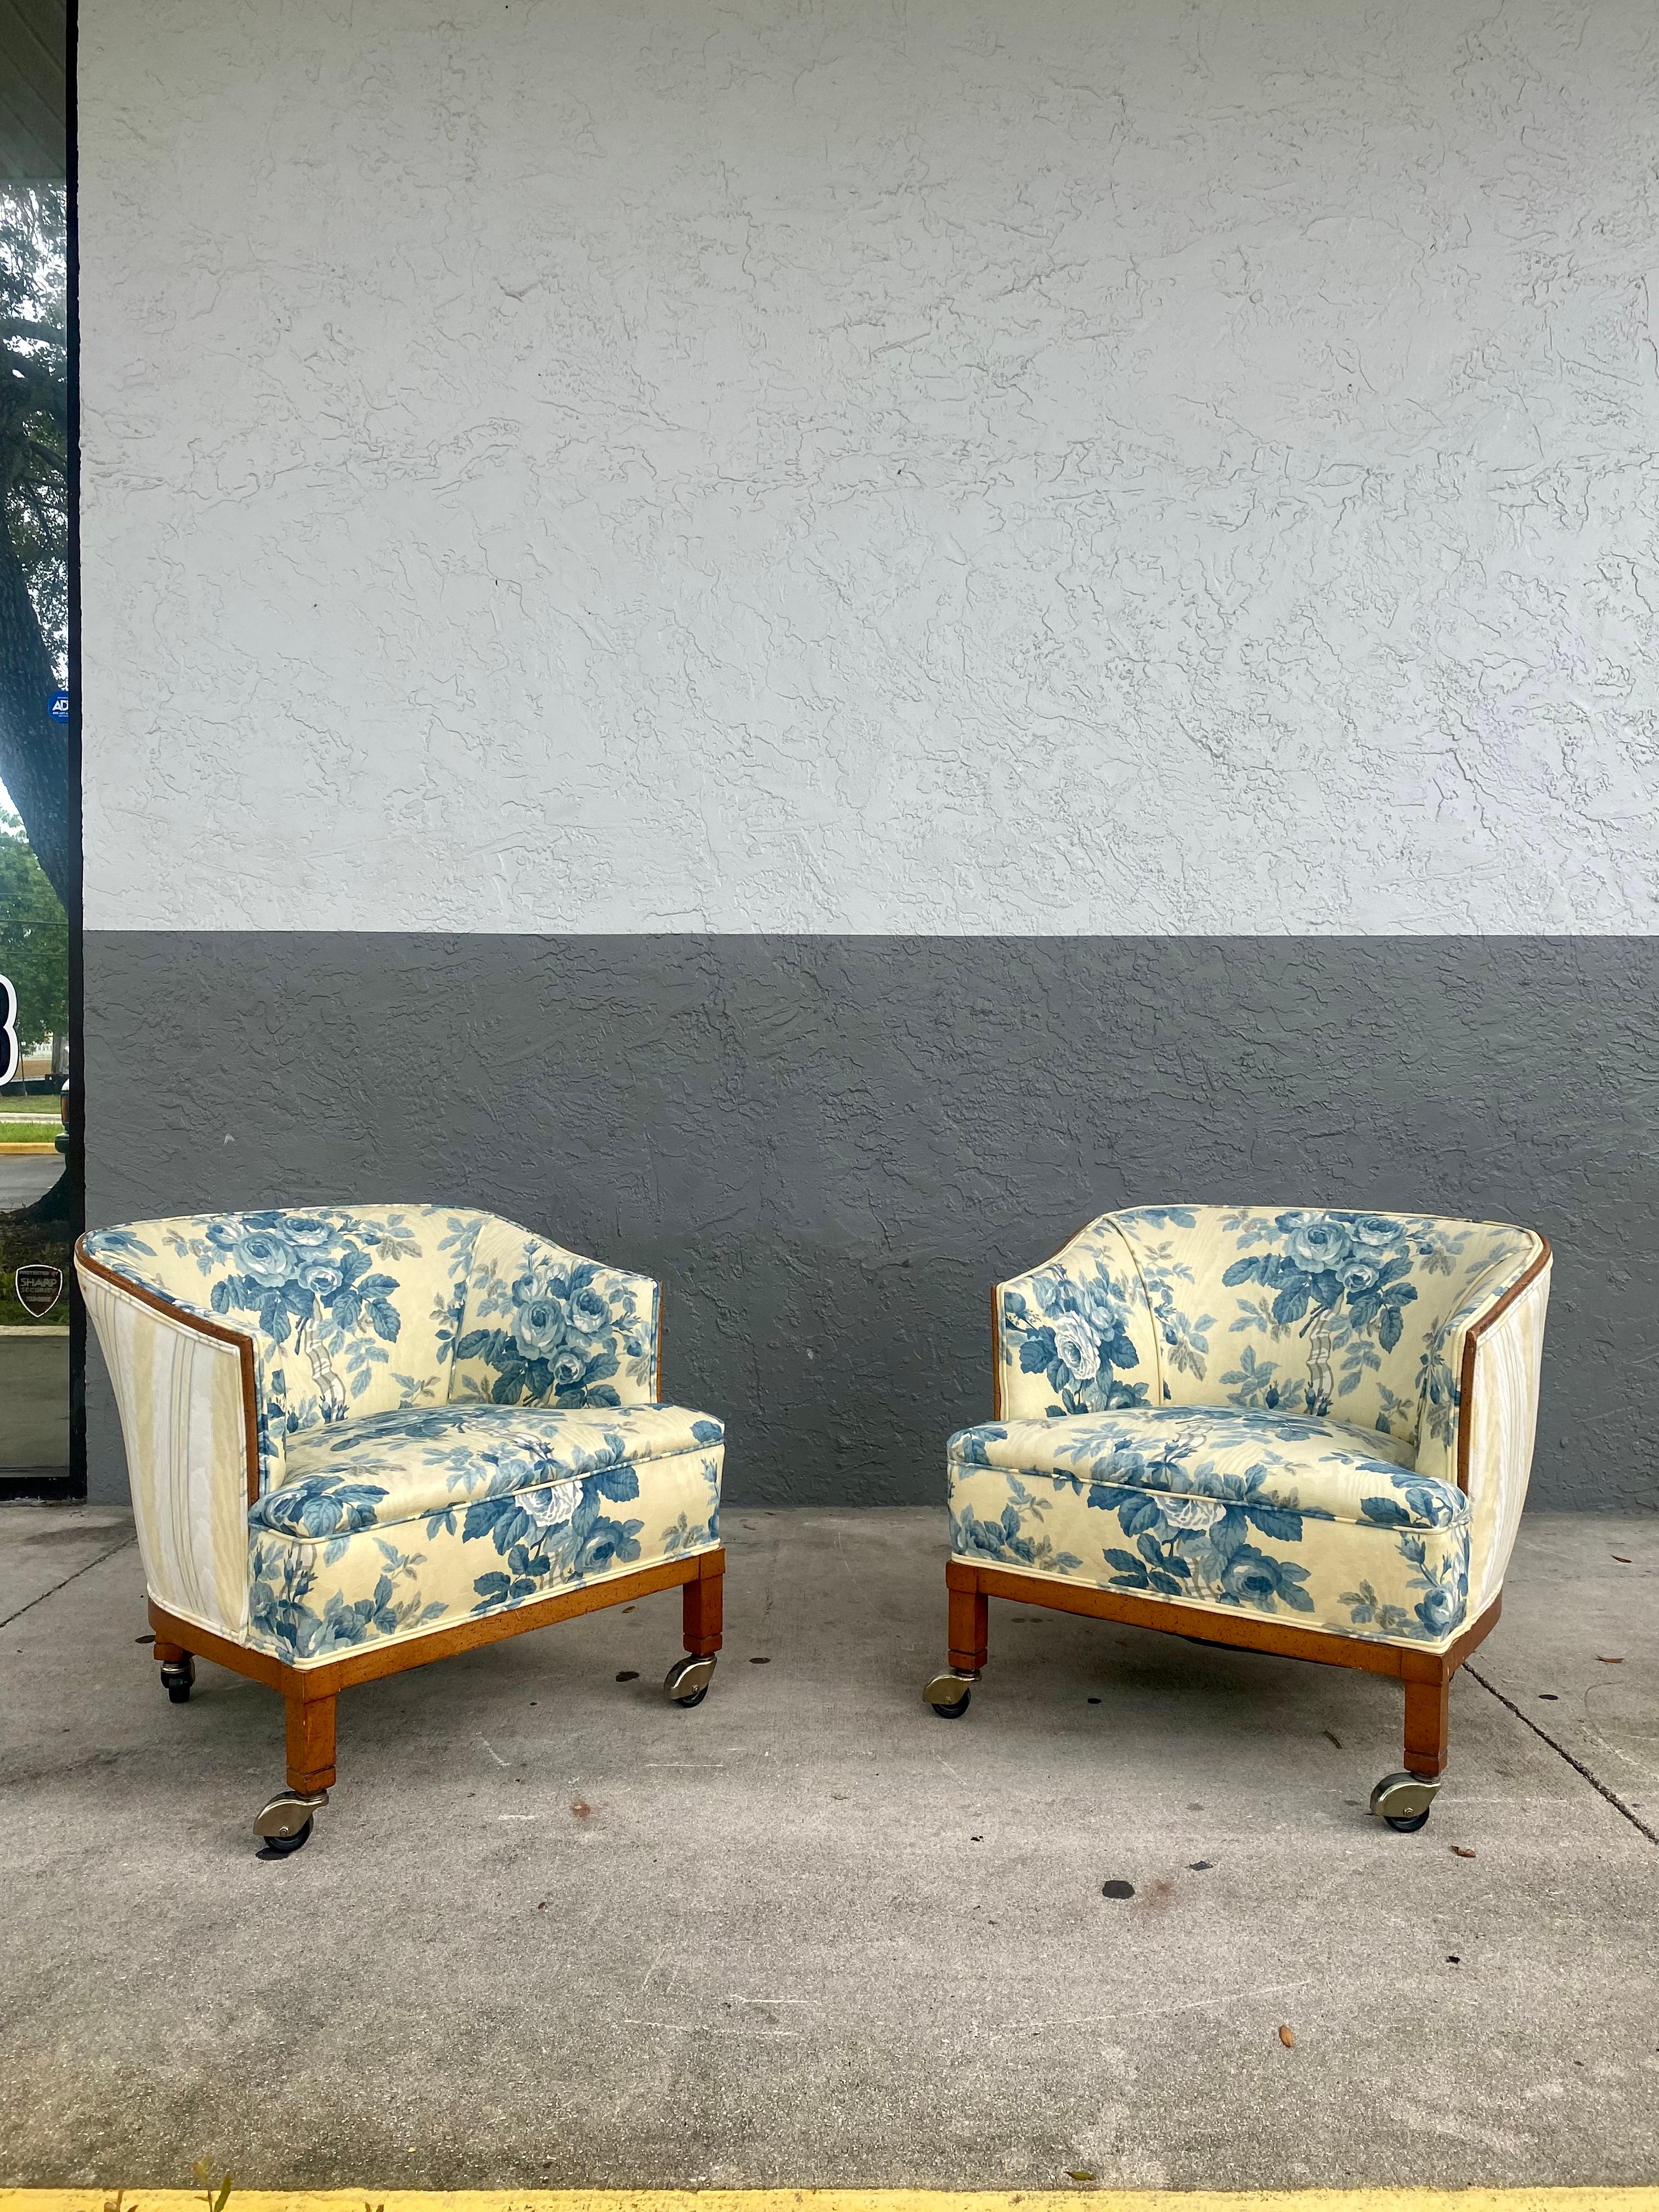 1960s French Toile Barrel Back Wood Castors Chairs, Set of 2 In Good Condition For Sale In Fort Lauderdale, FL